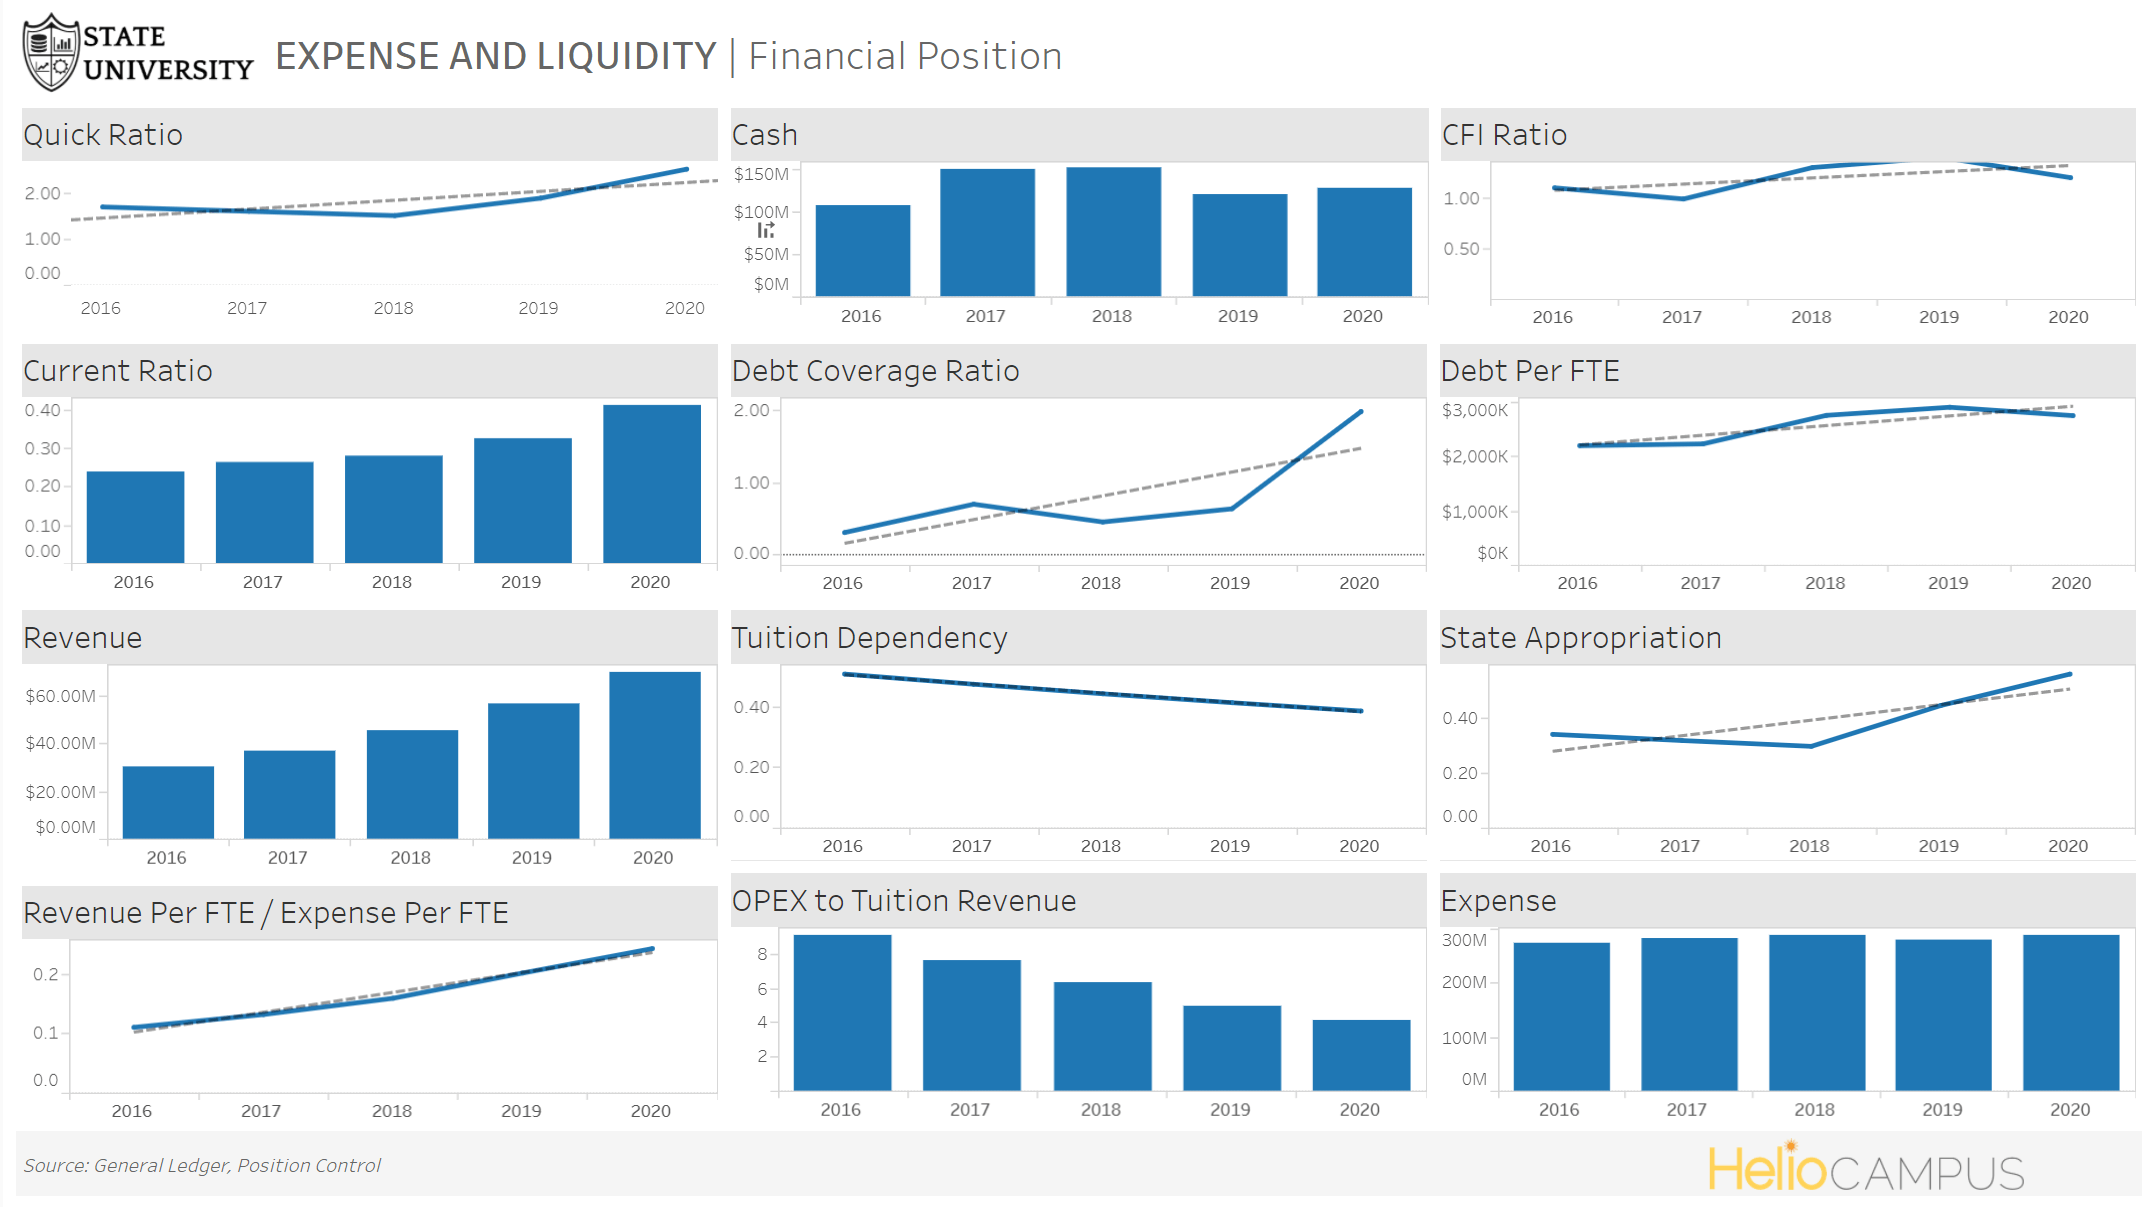 Image of multiple line and bar graphs comparing various financial statistics